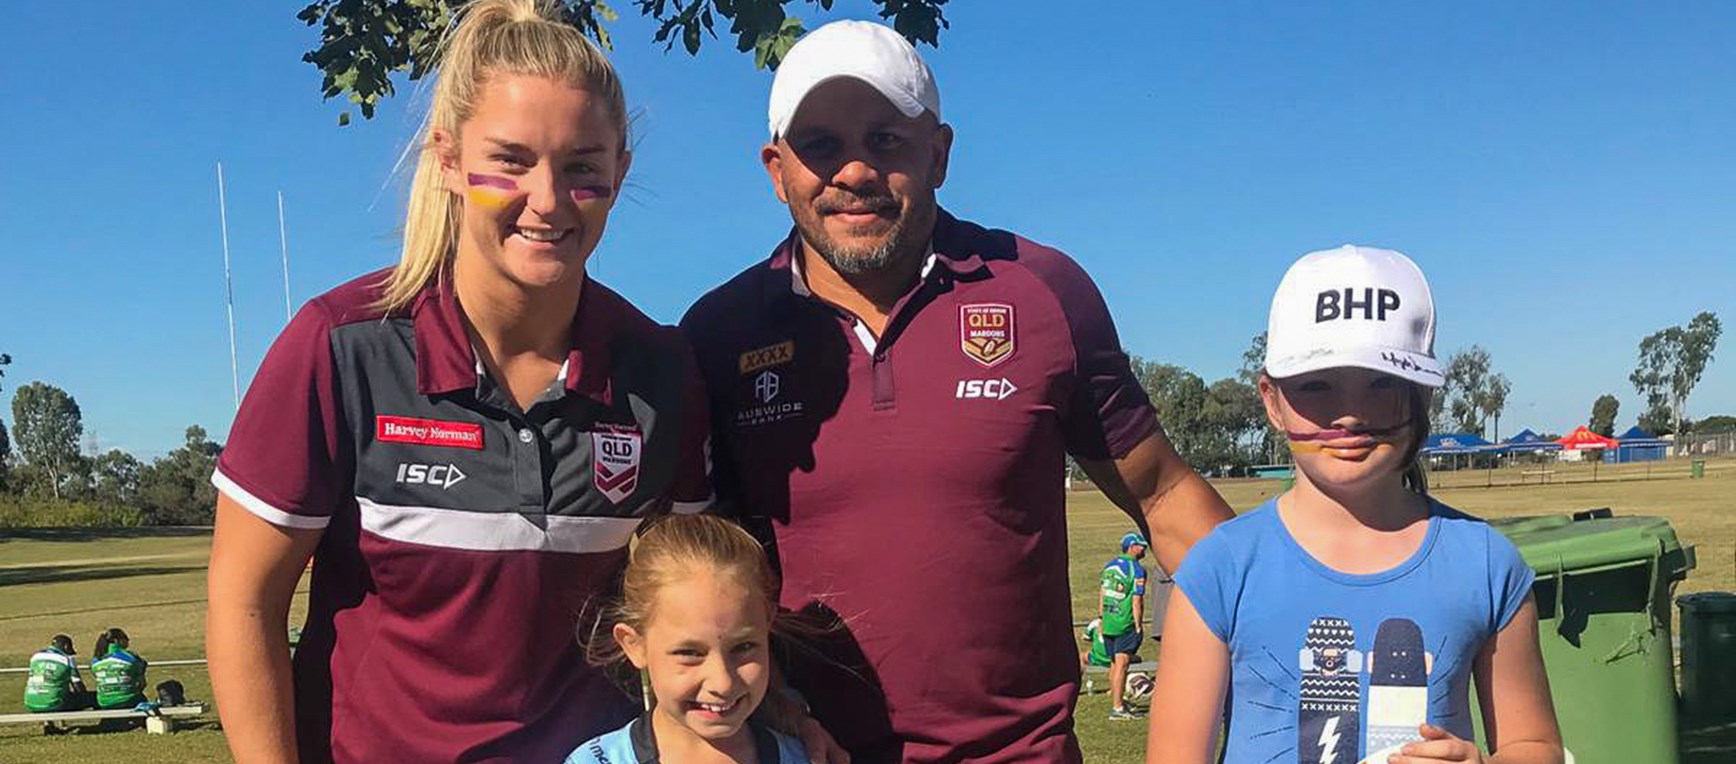 In pictures: BHP Kicking Goals Community Days